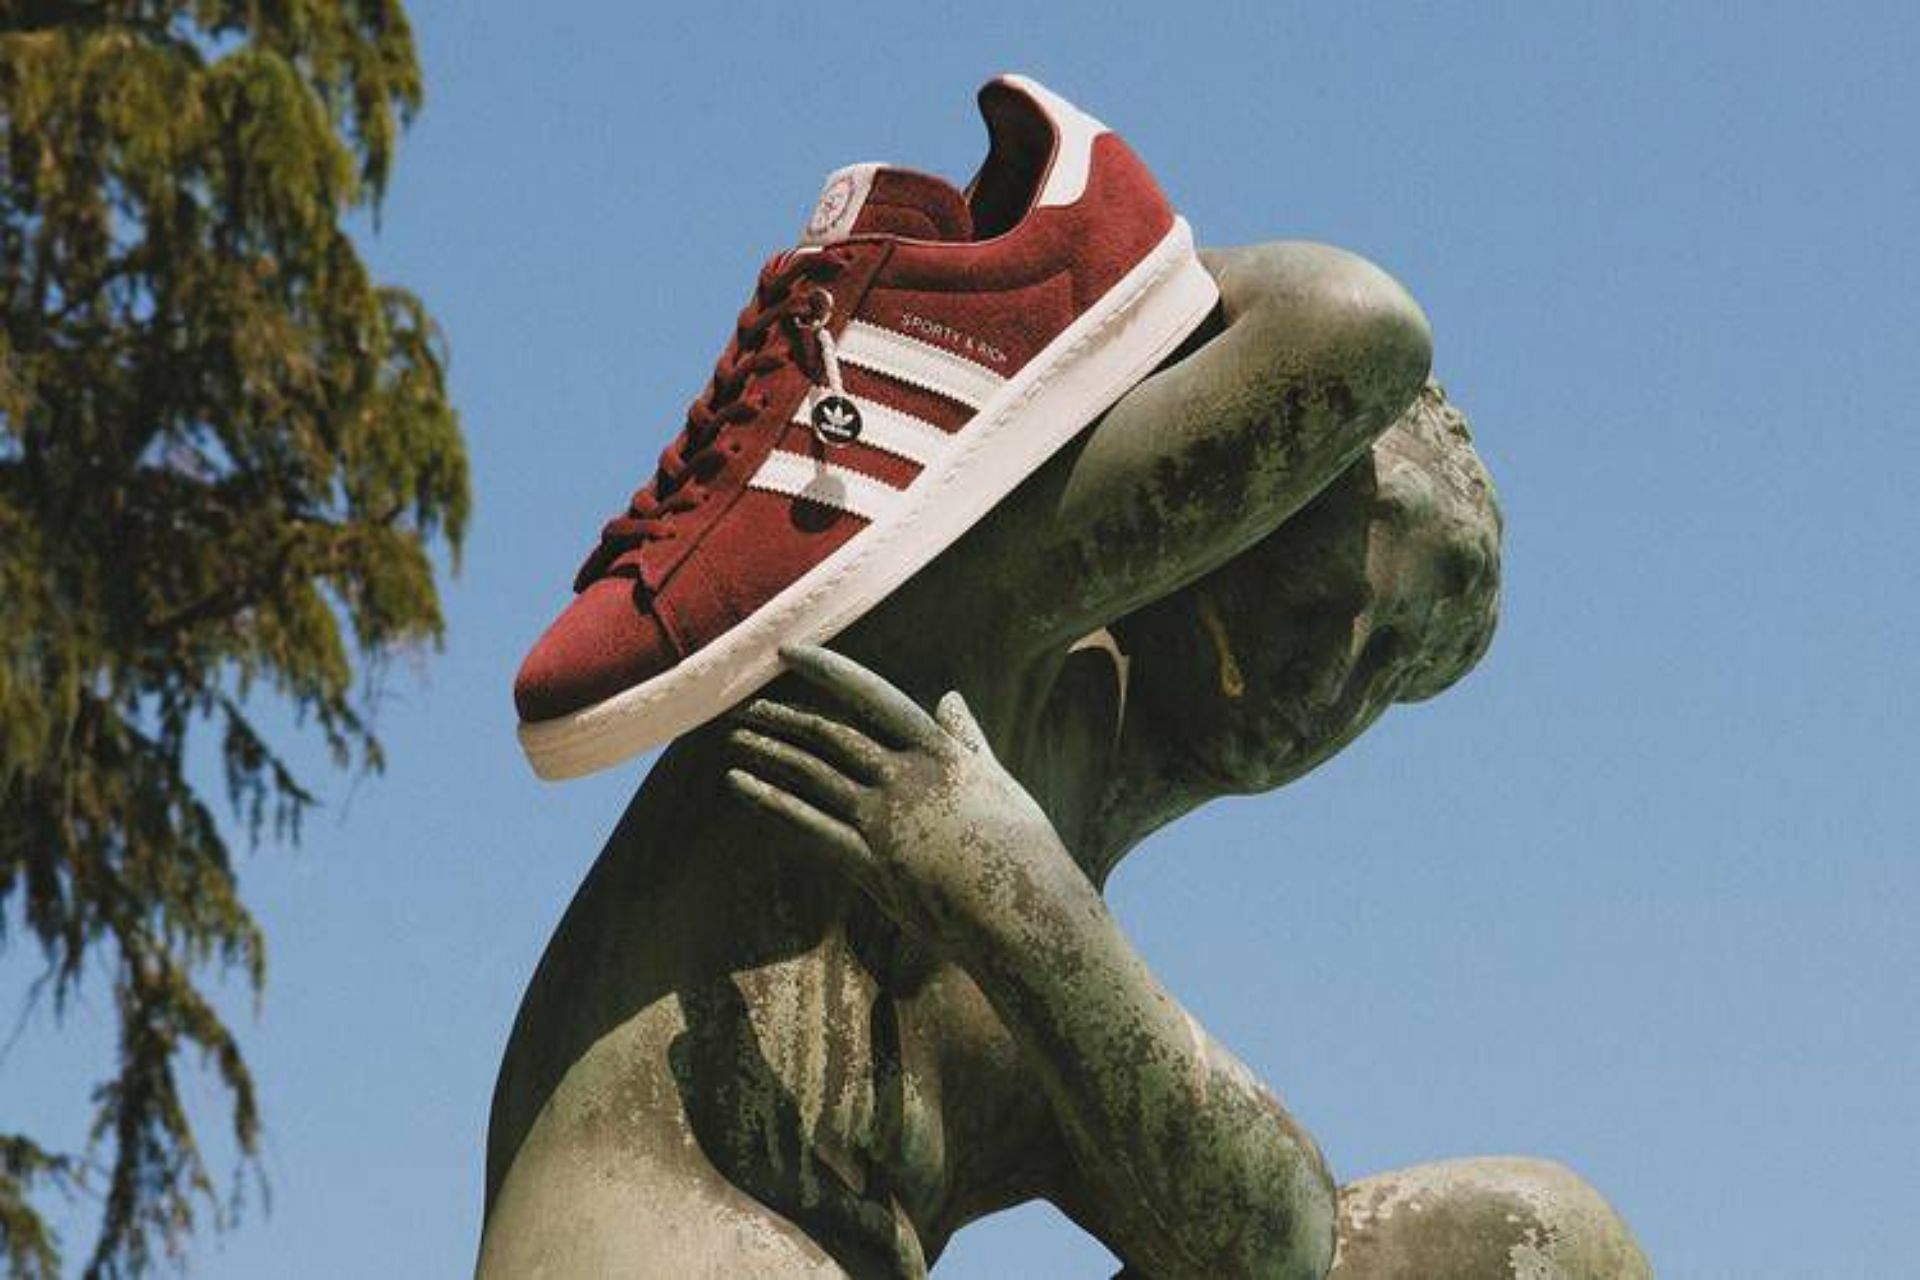 Take a look at the Stan Smith shoes offered under the new collection (Image via Adidas)